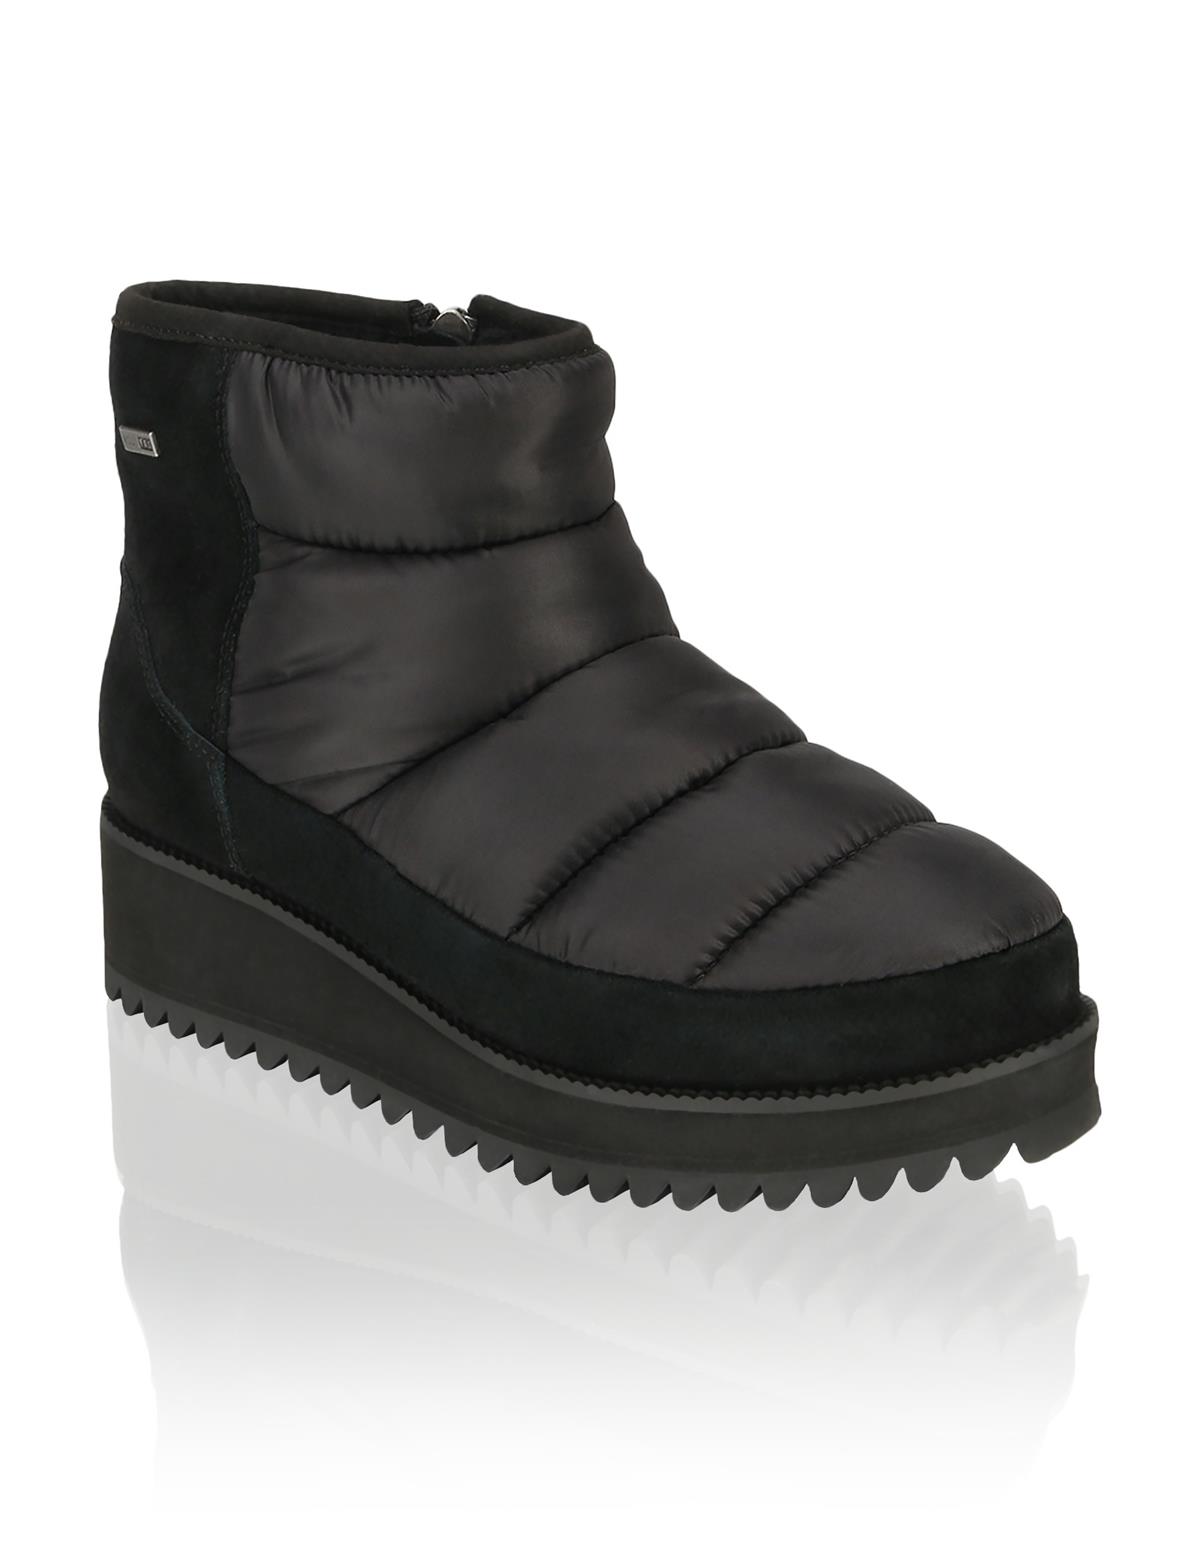 HUMANIC 21 UGG Quilted UGG-Boot EUR 170 1623615850